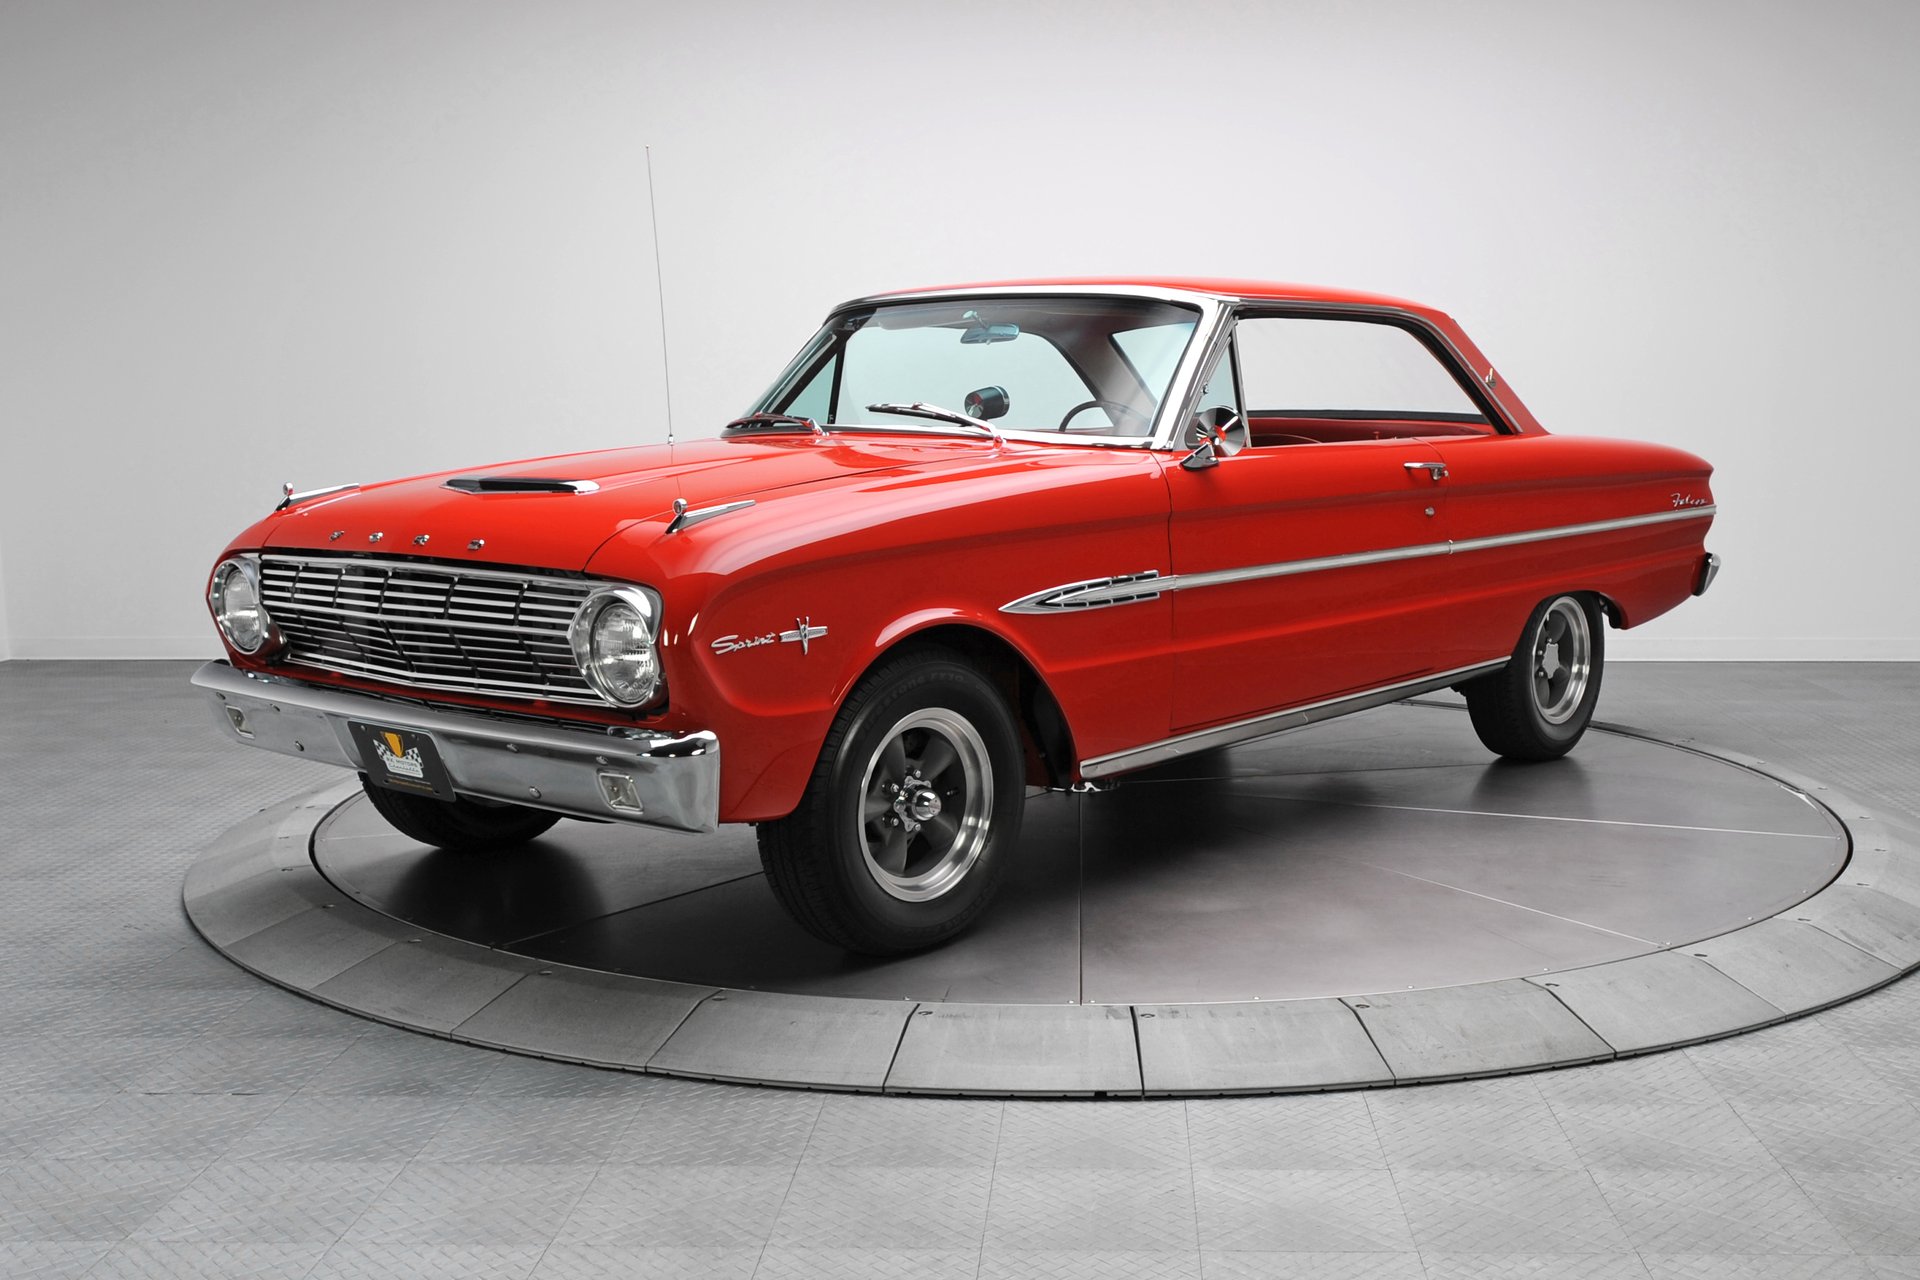 For Sale 1963 1/2 Ford Falcon